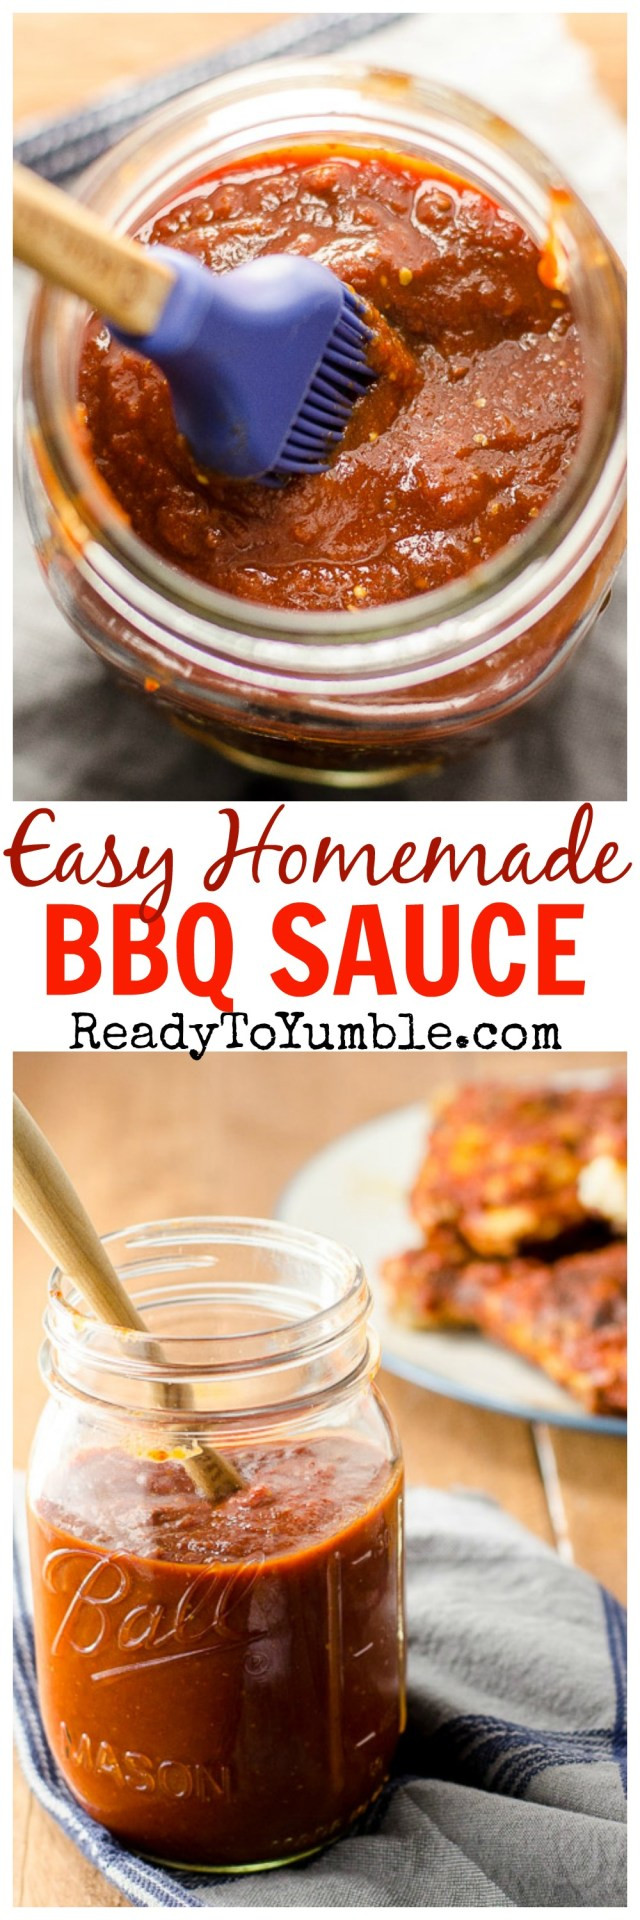 Simple Homemade Bbq Sauce
 Easy Homemade Barbecue Sauce Ready to Yumble